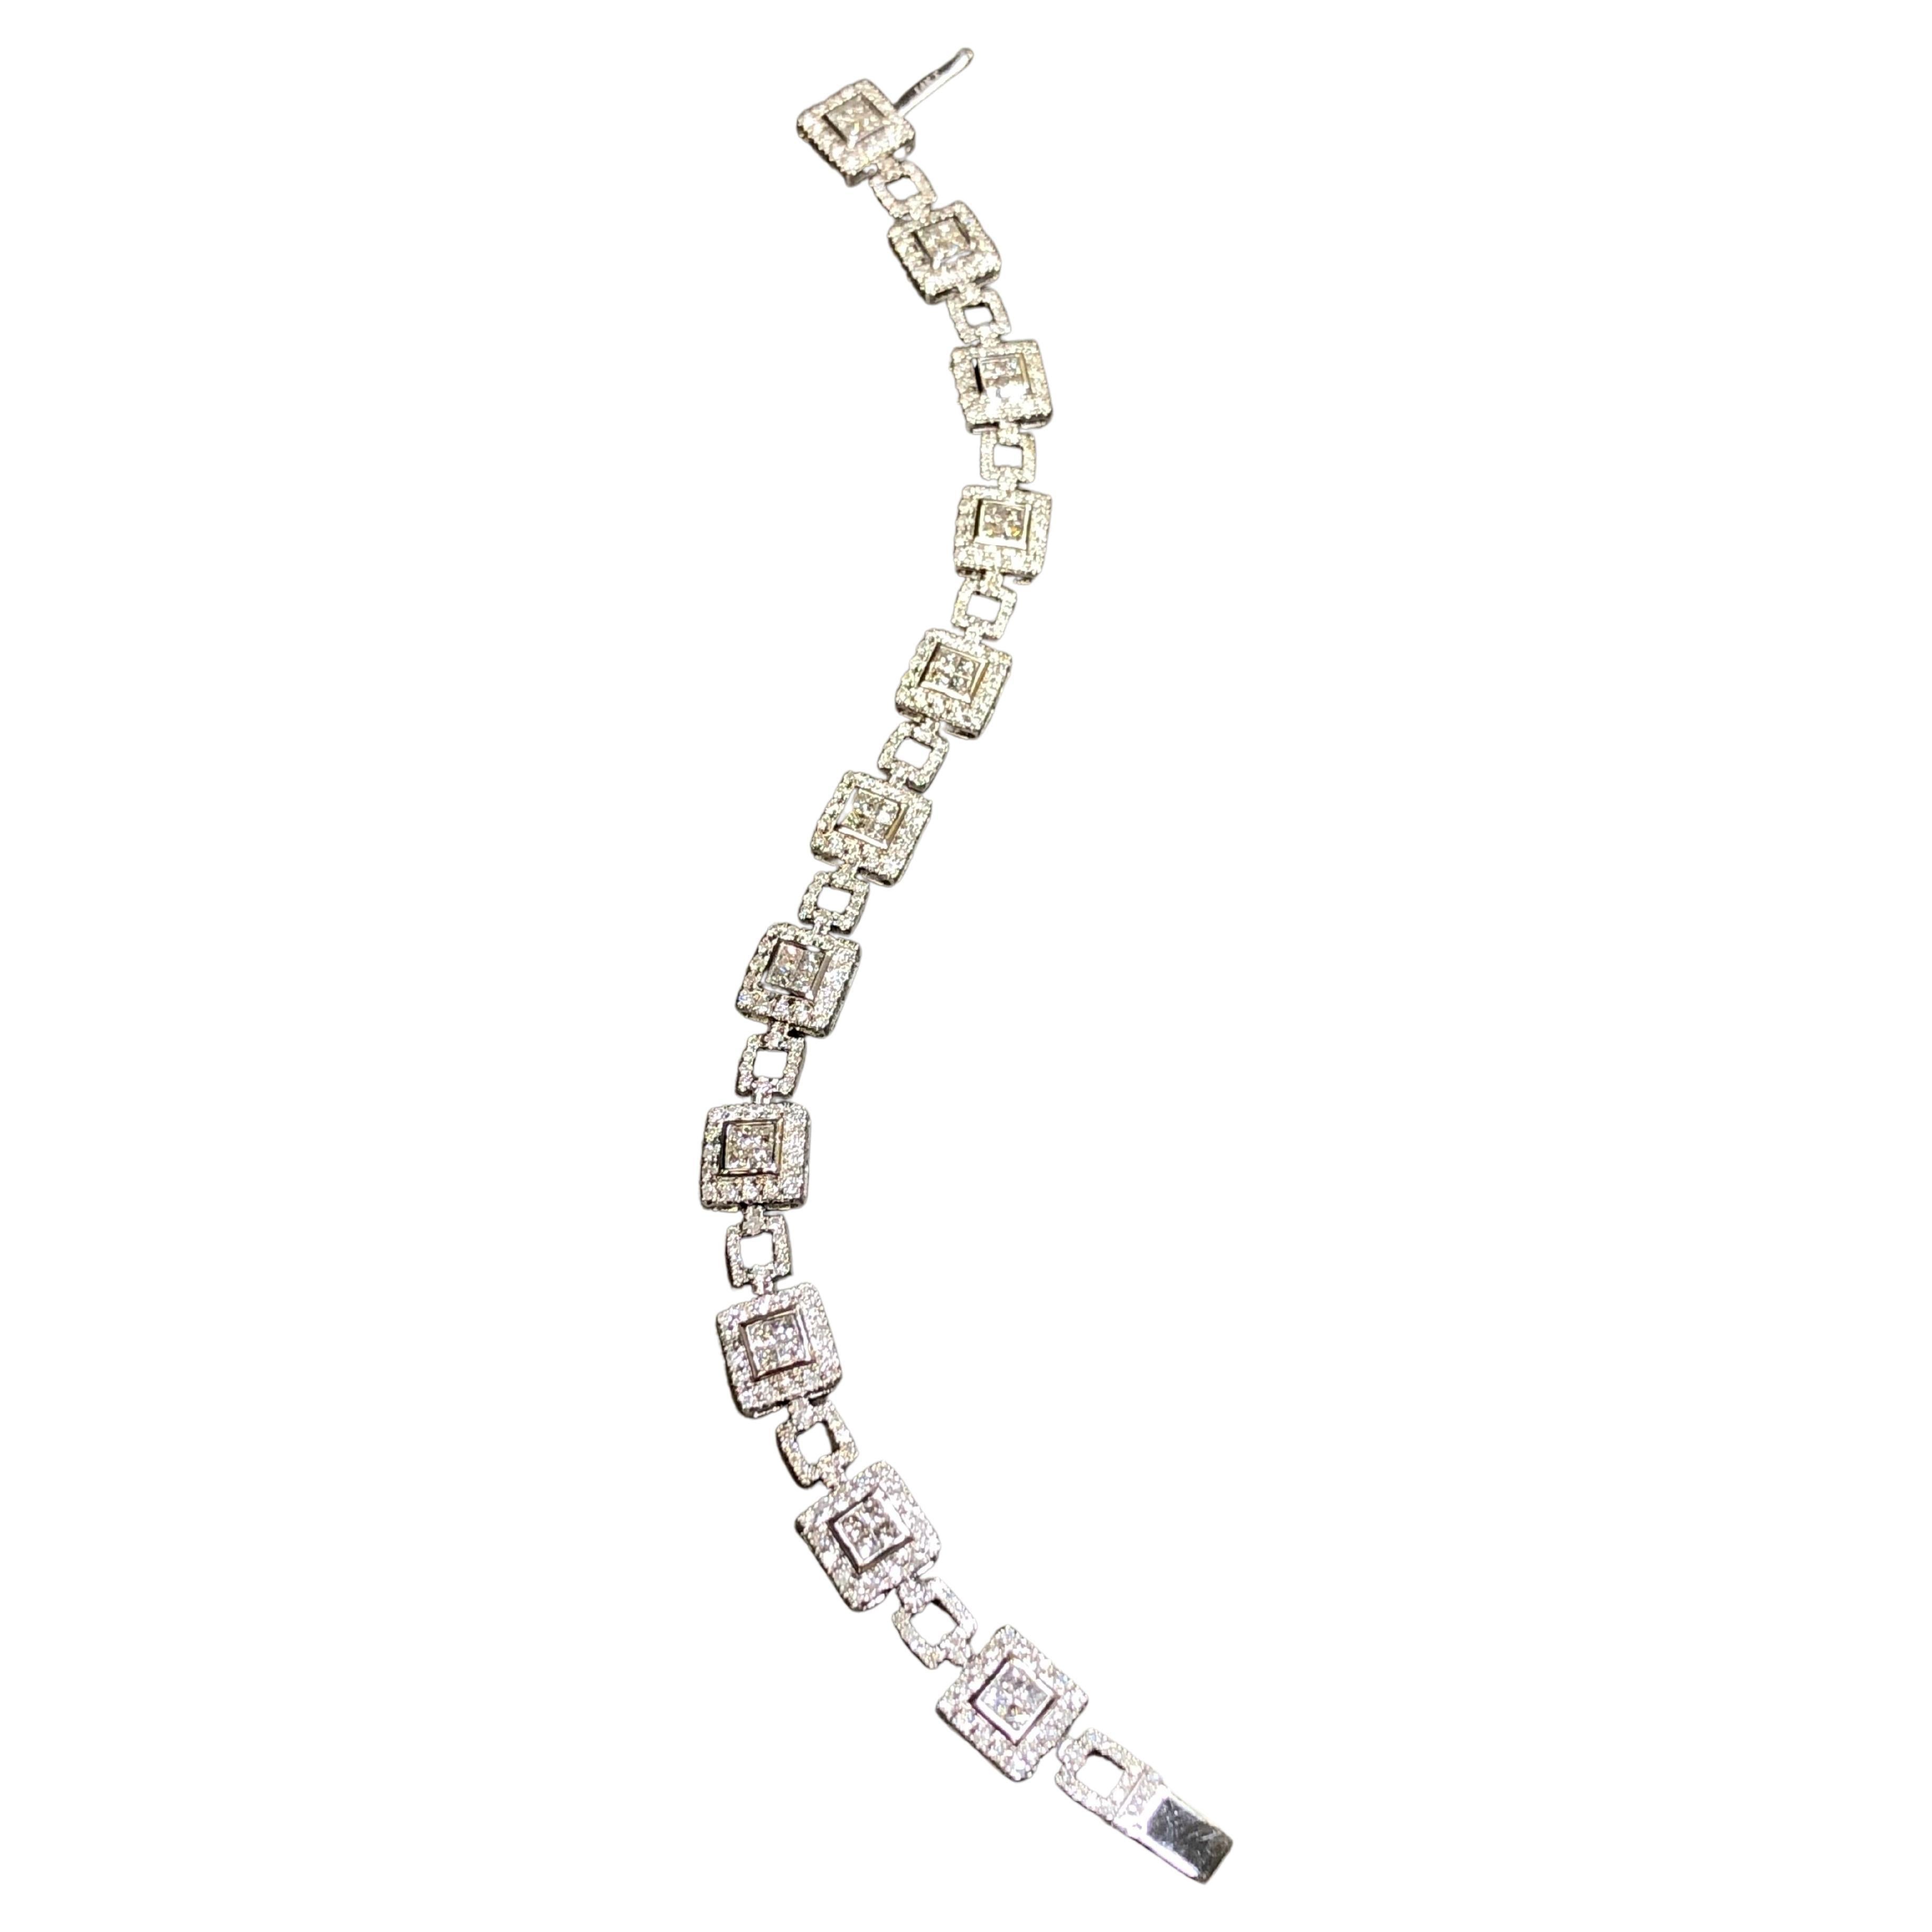 
A fashionably stunning contemporary bracelet done in 14K white gold and set with approximately 5.10cttw in round and princess cut diamonds ranging H-J in color and Si1-i1 in clarity. There isn’t a dull section in this piece and as you can say it